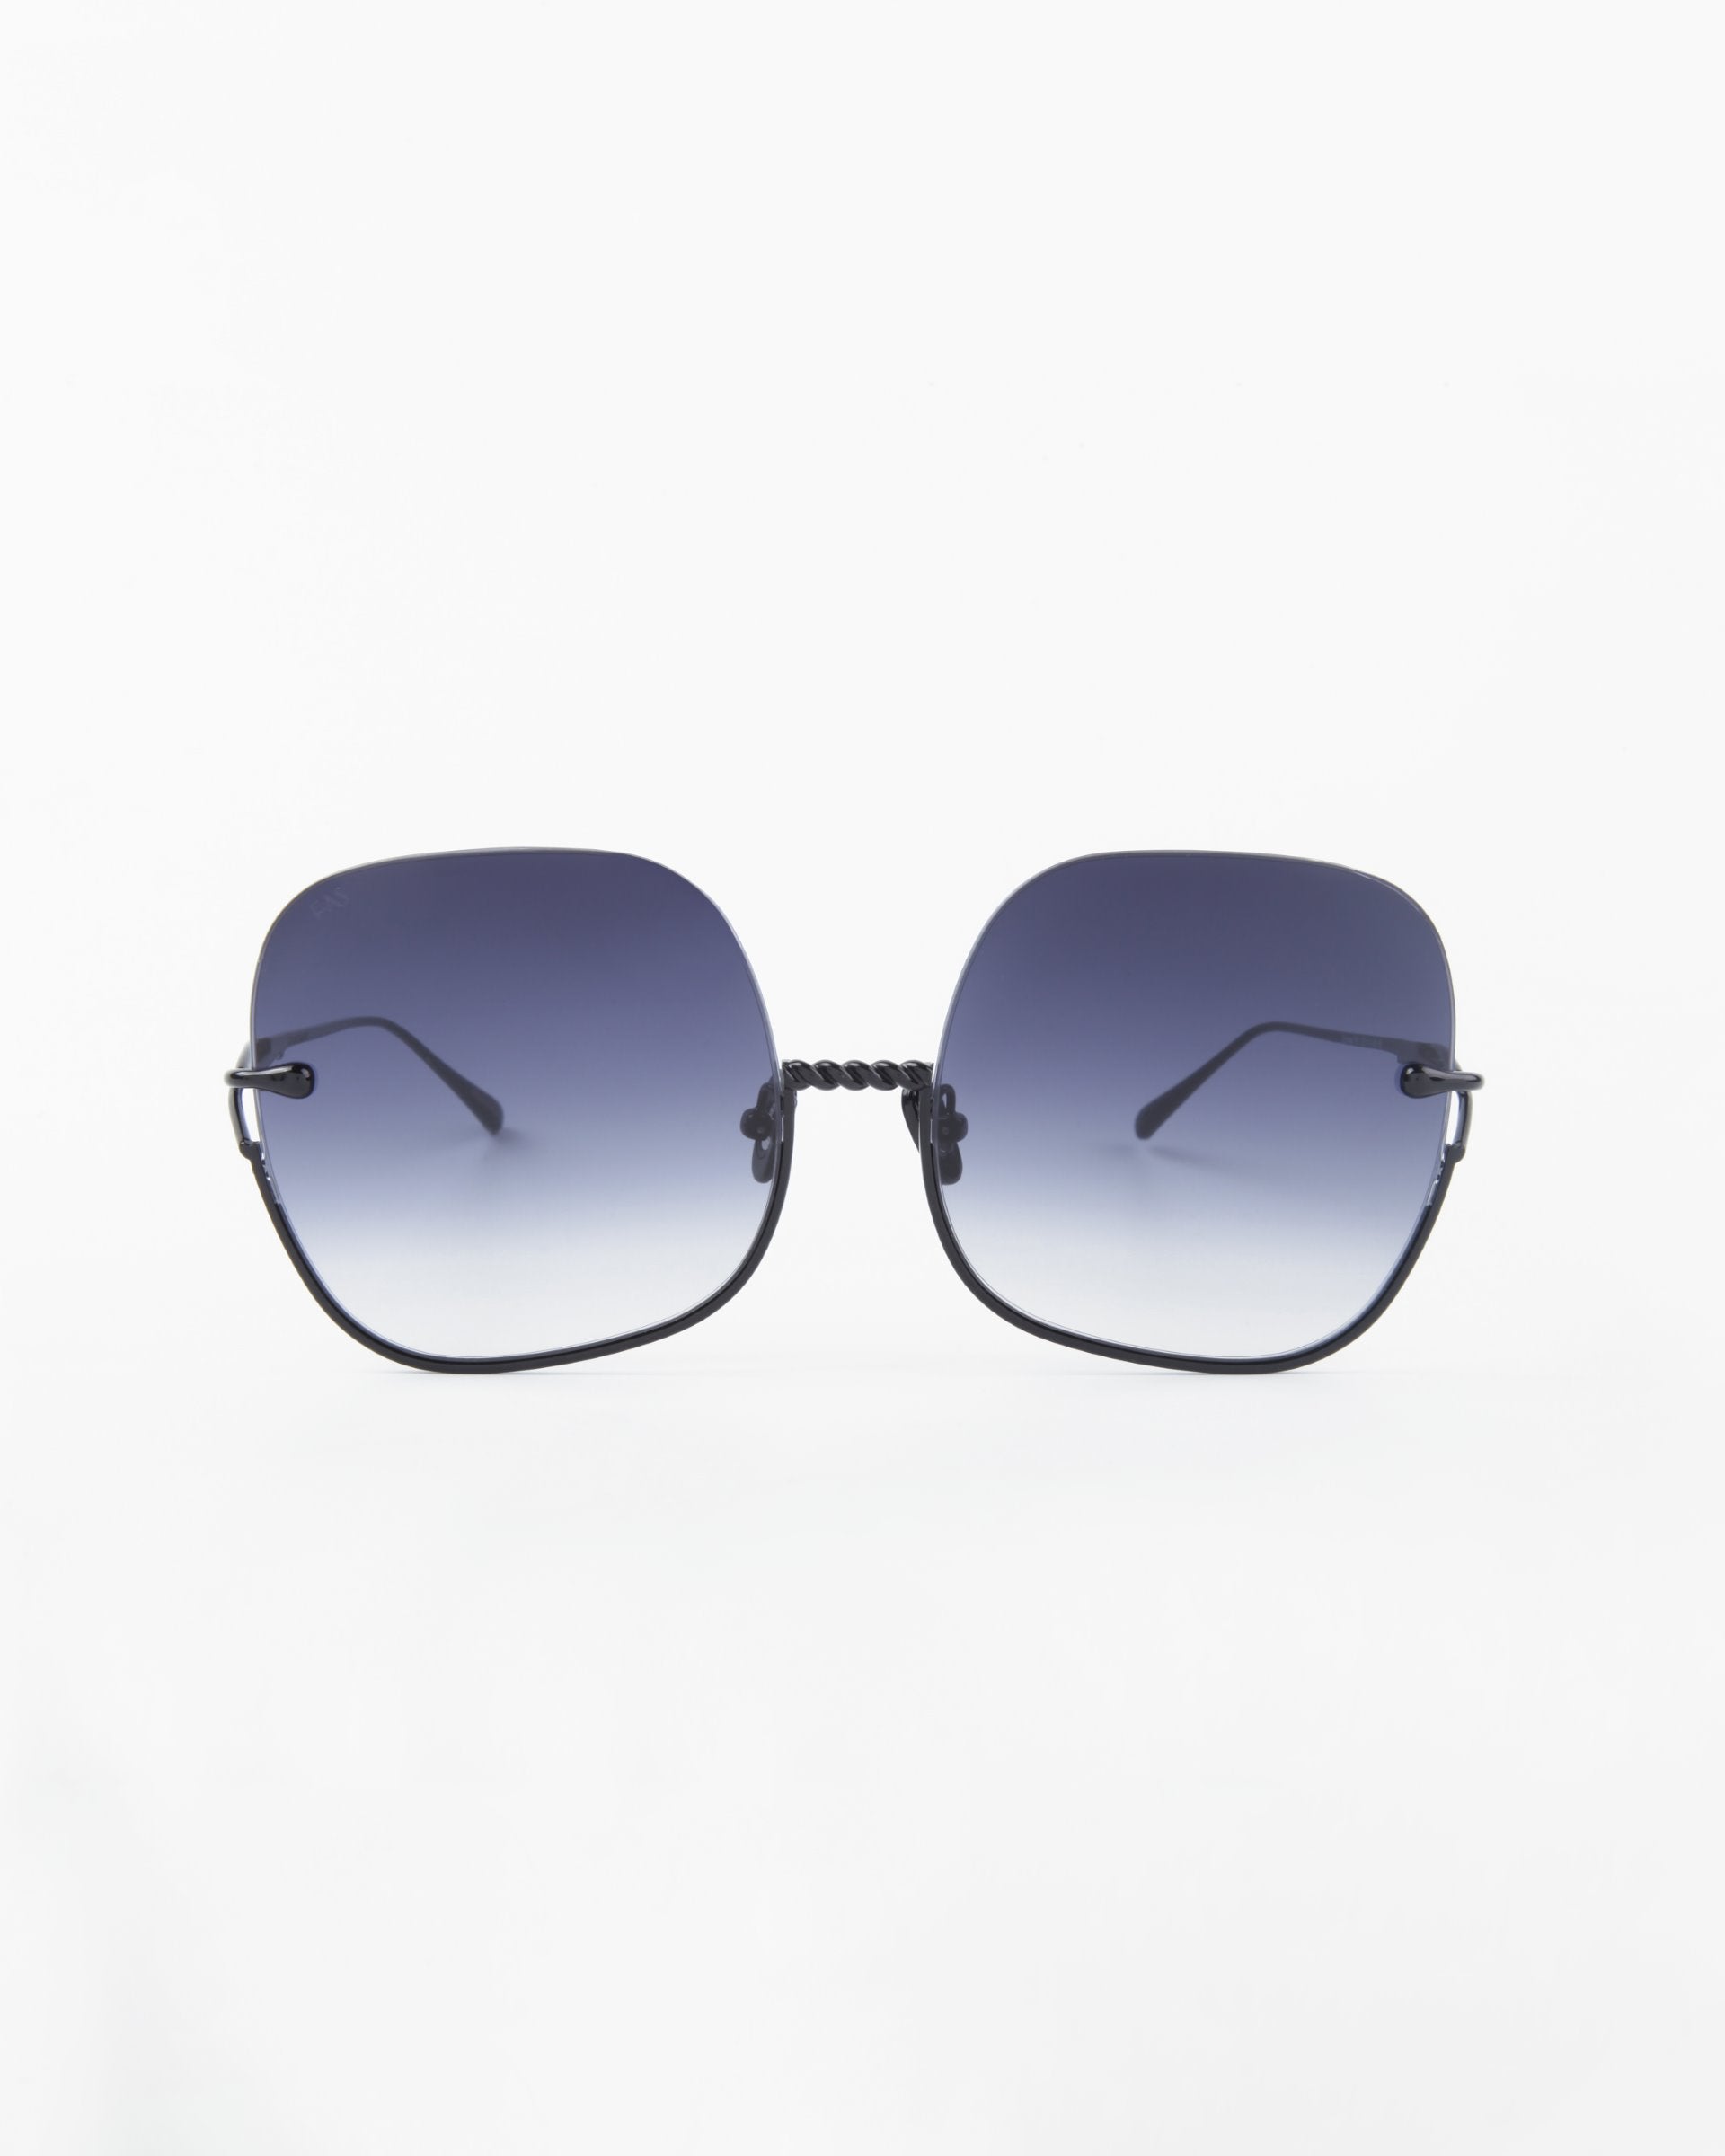 A pair of Duchess by For Art's Sake®: oversized, square-shaped sunglasses featuring thin black frames and gradient blue lenses that fade from dark at the top to lighter at the bottom. The shatter-resistant lenses offer UVA & UVB protection, ensuring both style and safety. The background is plain white.